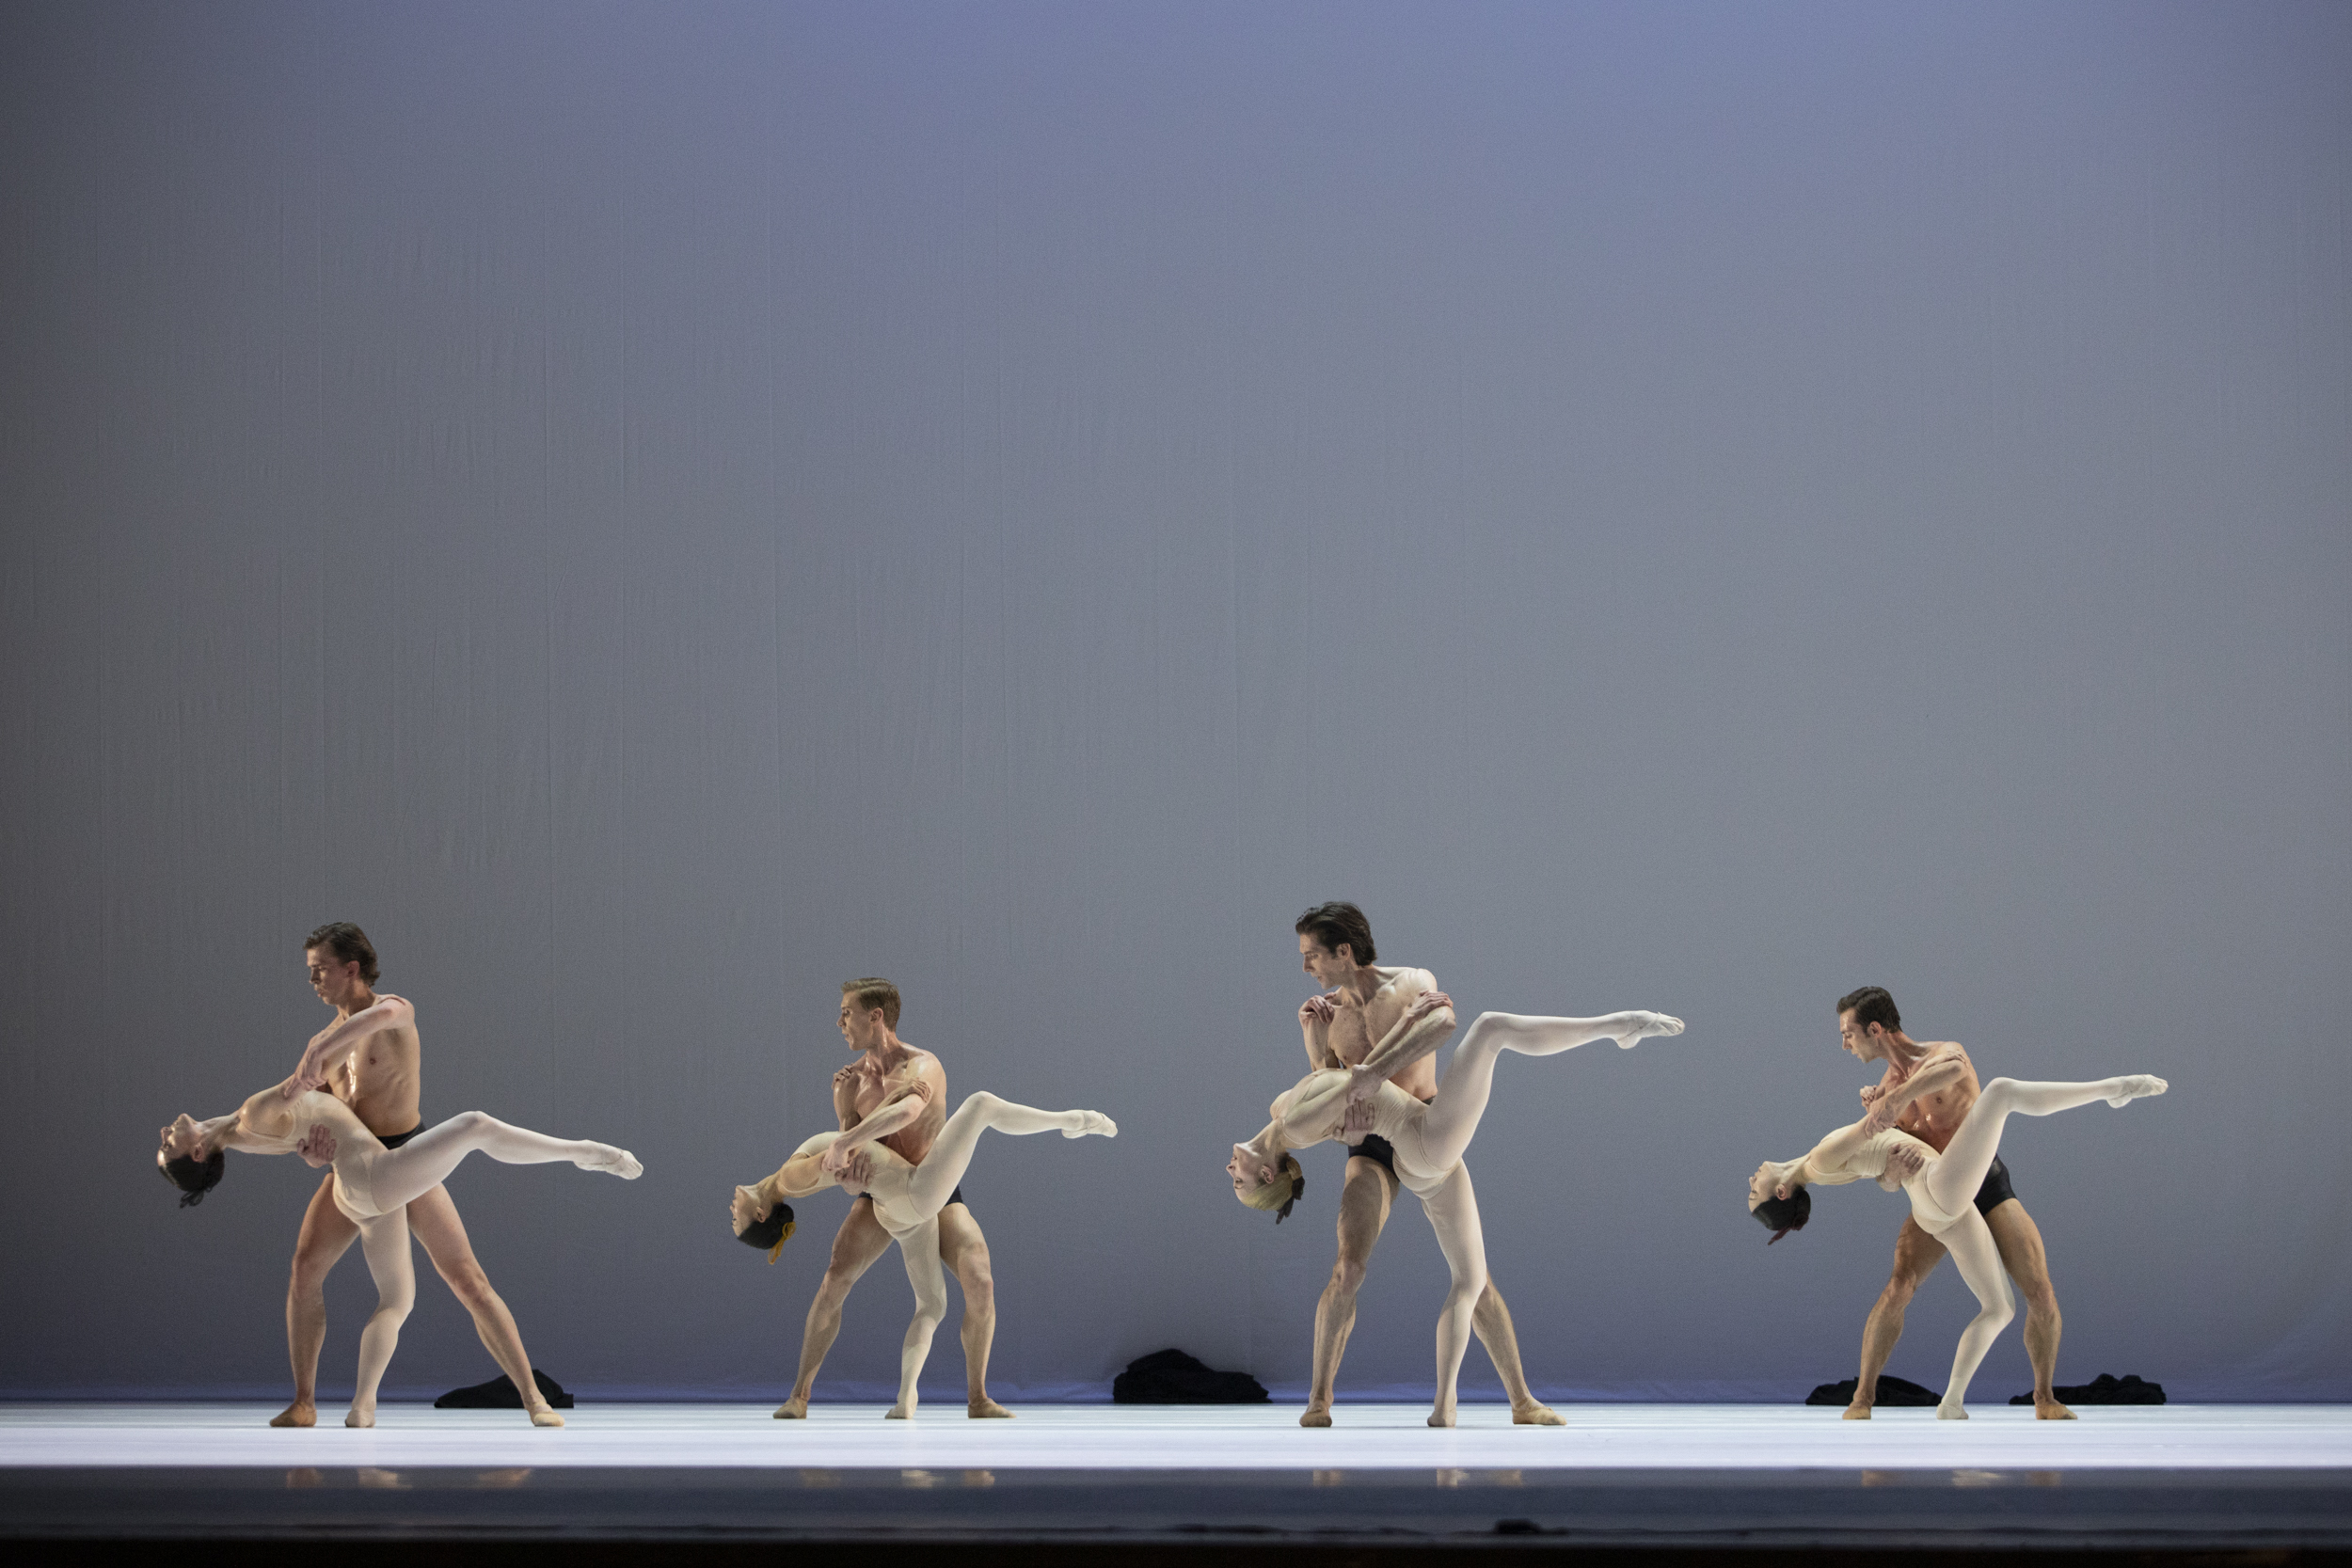 Four paits of dancers on the stage wearing nude costumes